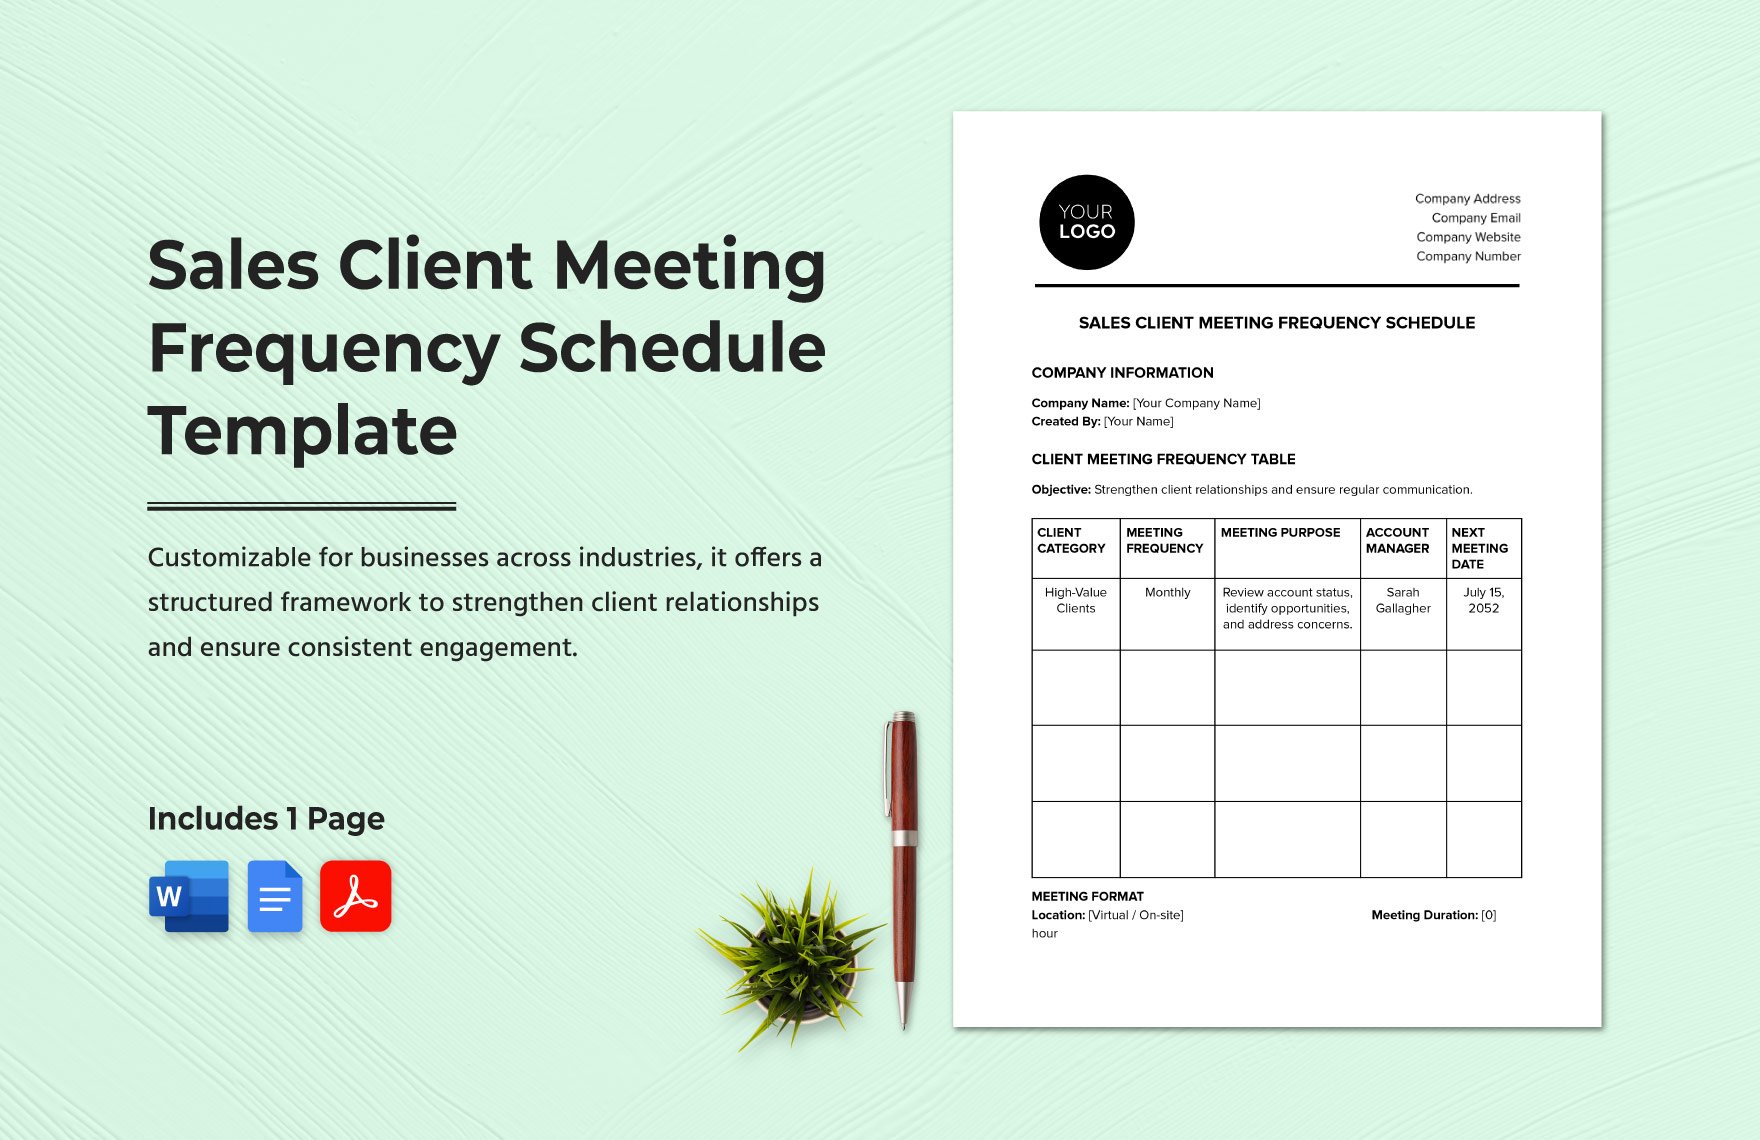 Sales Client Meeting Frequency Schedule Template in Word, Google Docs, PDF